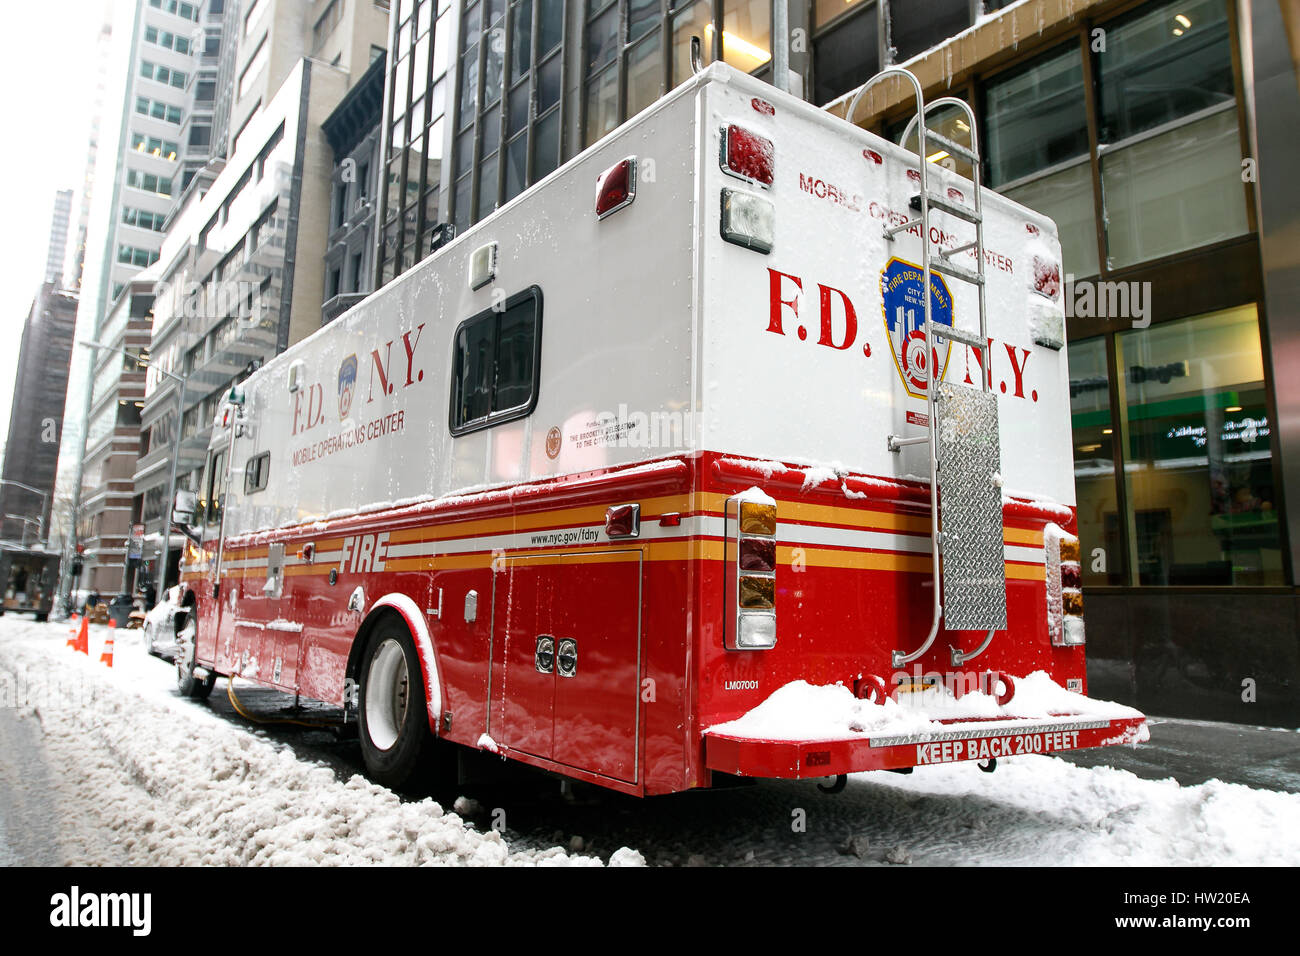 New York, Feburary 9, 2017: An FDNY mobile operations center is parked in the snow in midtown Manhattan. Stock Photo